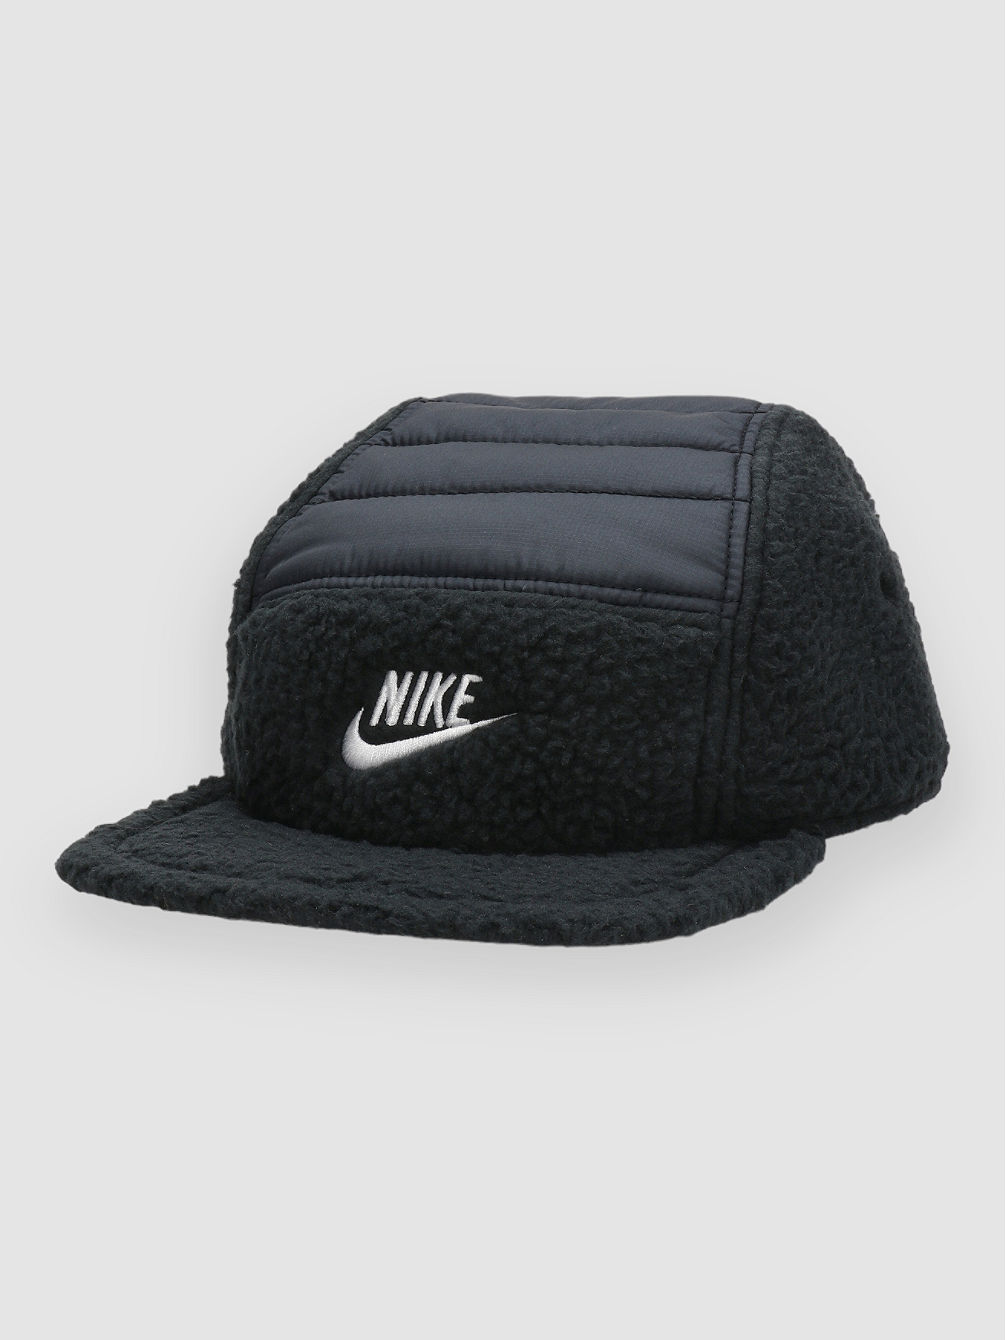 Fly Fb Outdoor L Casquette